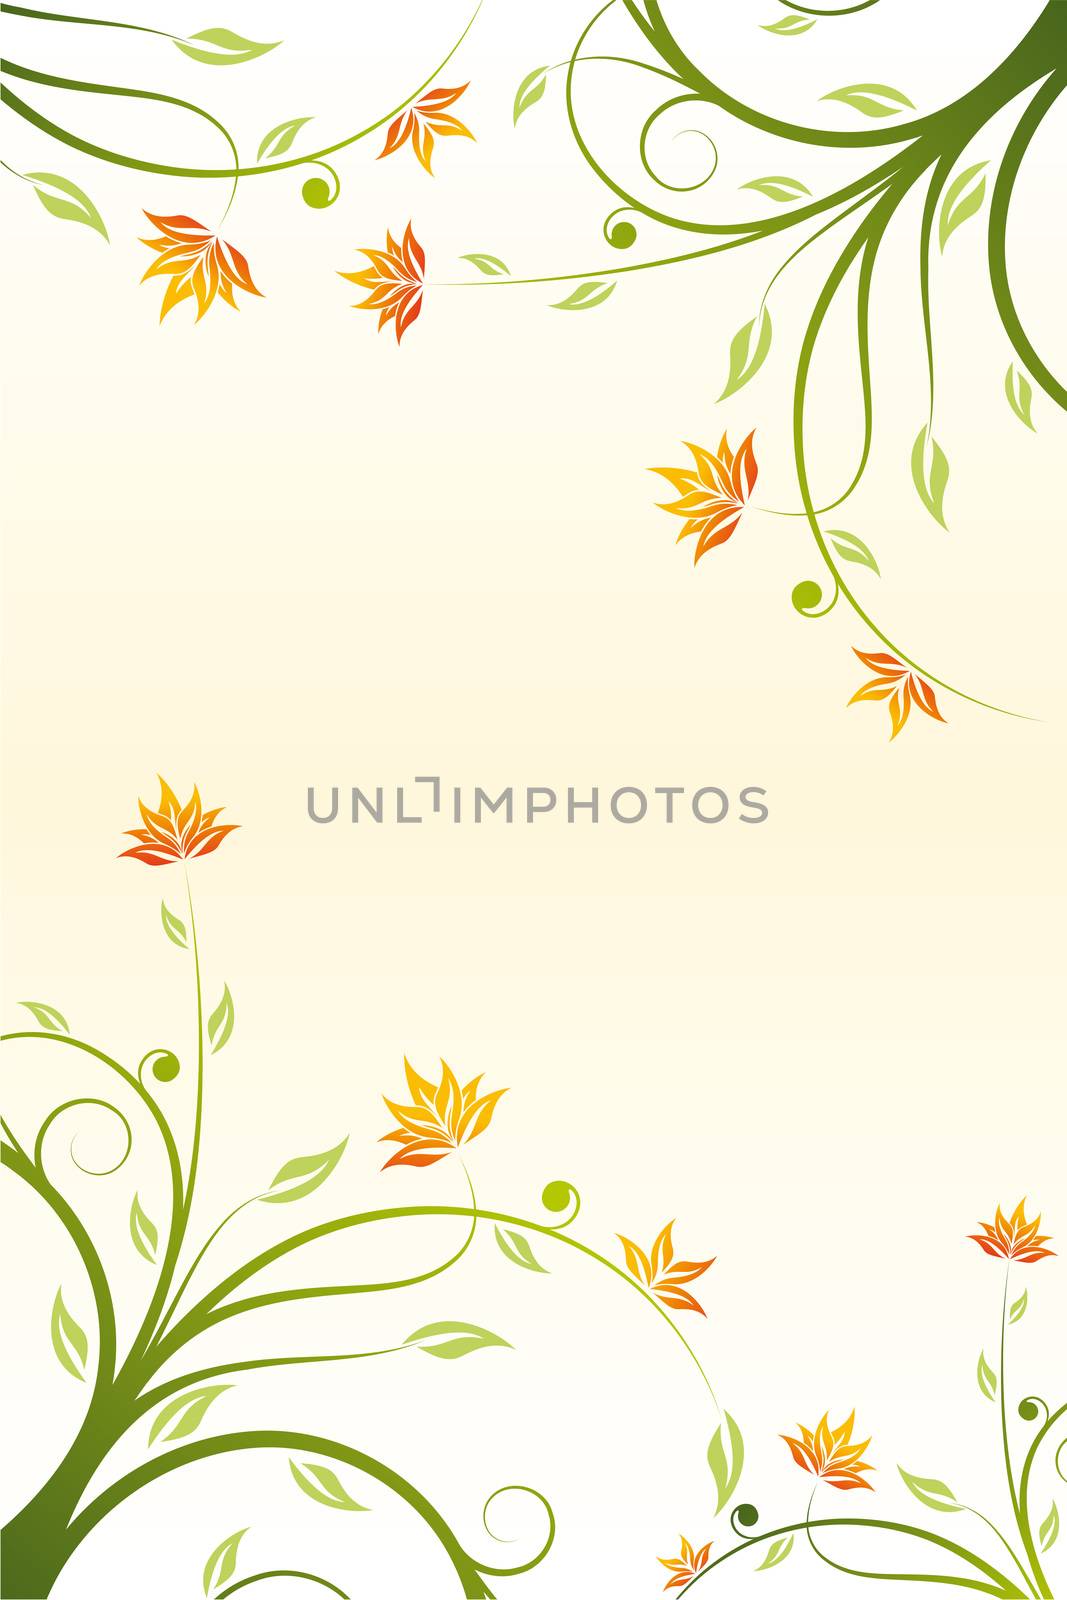 Abstract floral design background for creative ideas